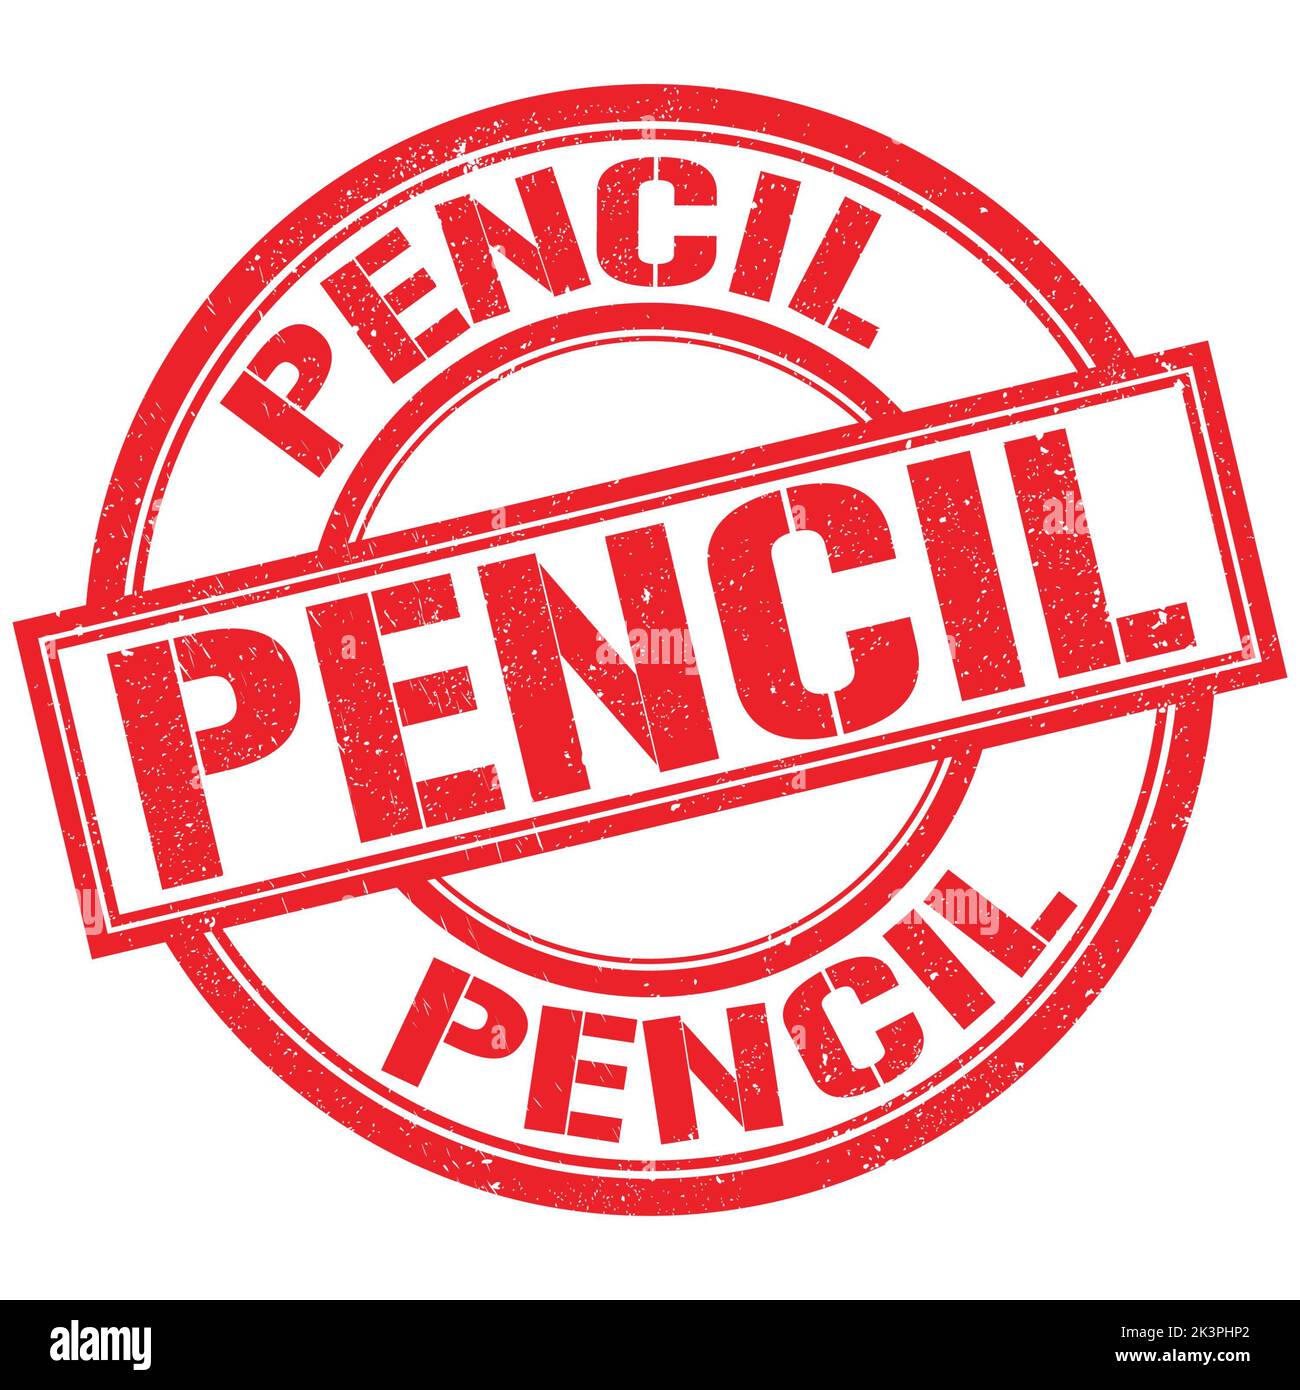 PENCIL text written on red round stamp sign Stock Photo